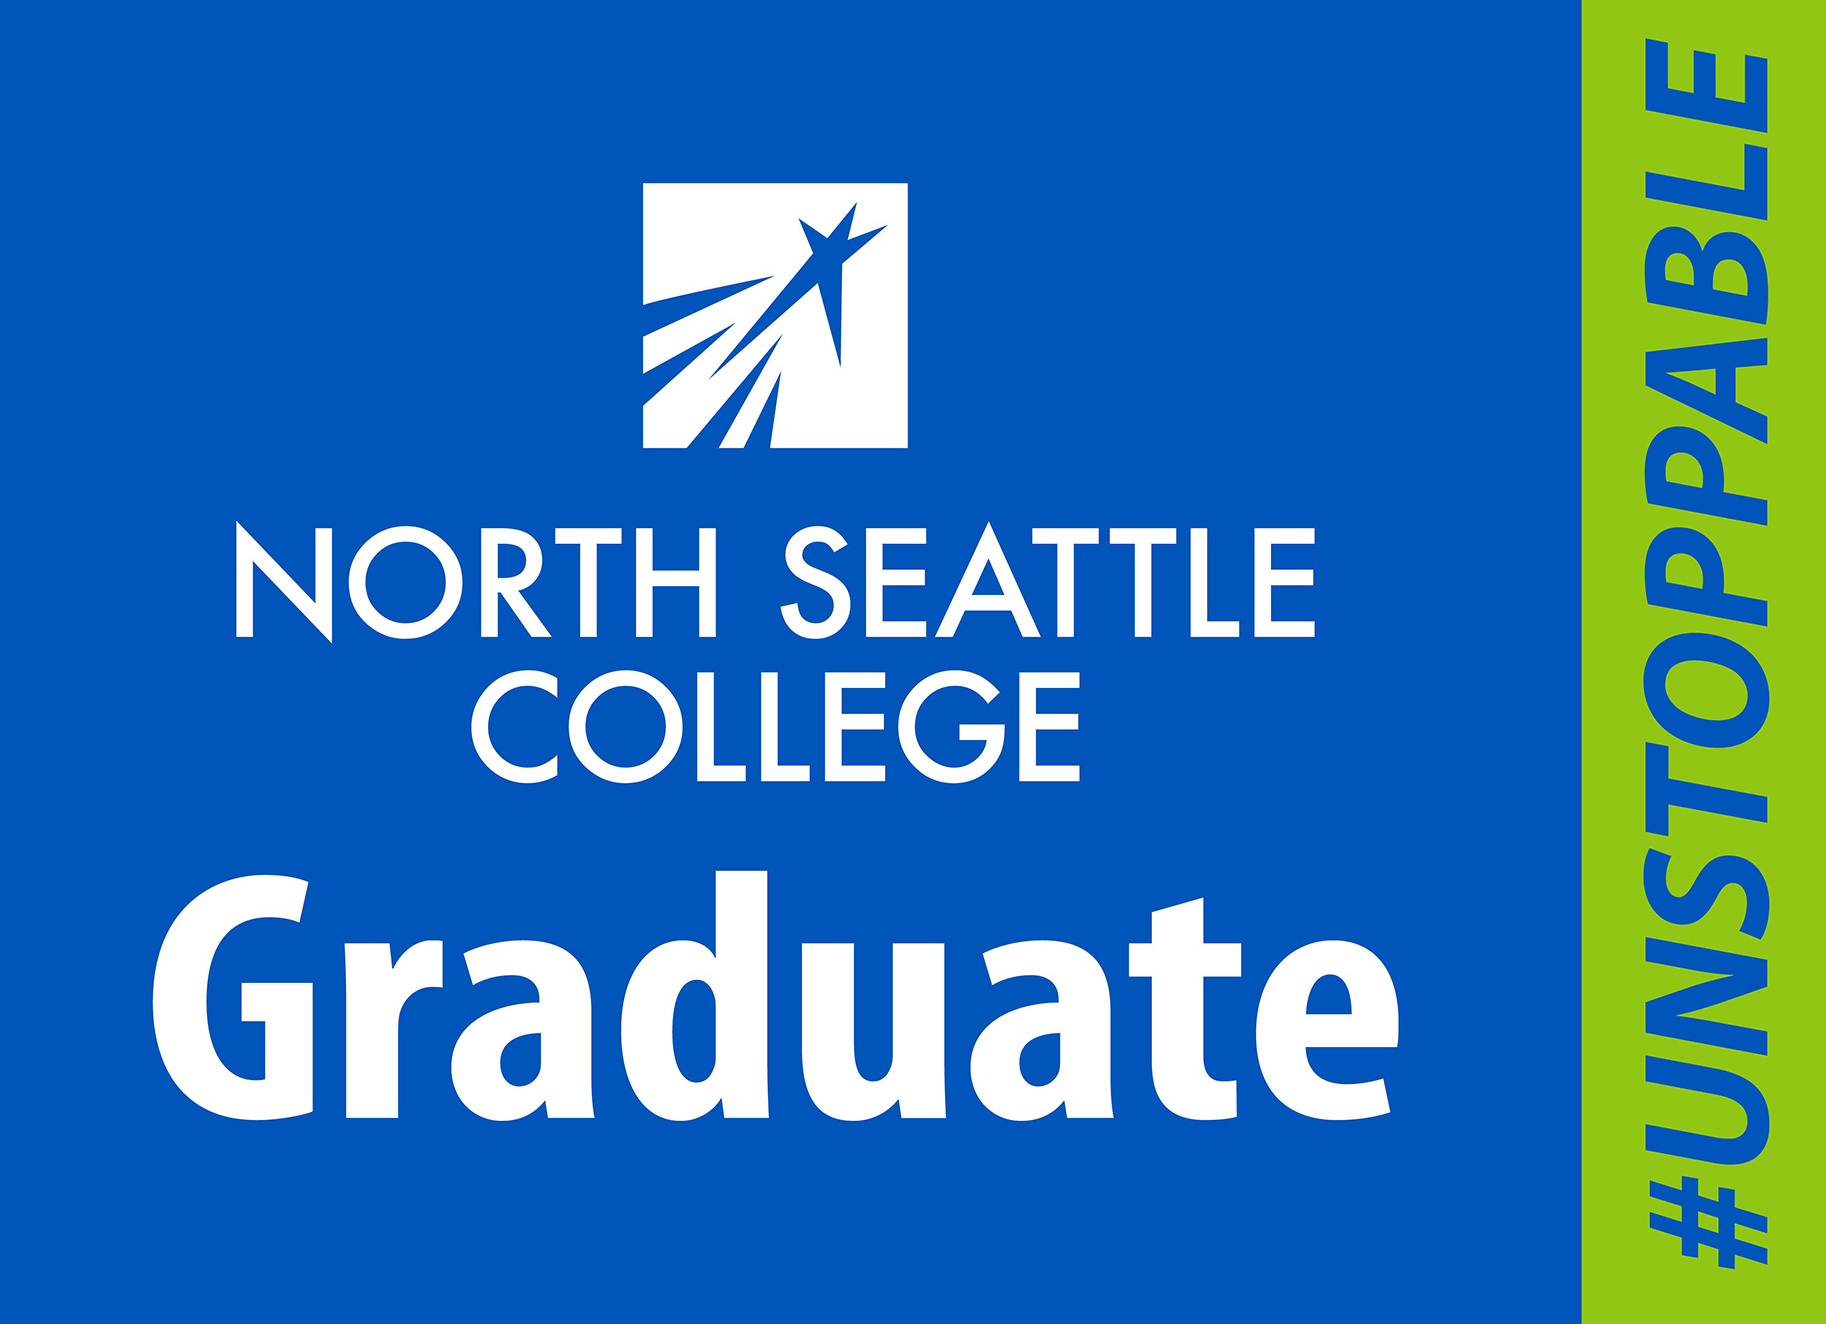 North Seattle Graduate UNSTOPPABLE yard sign